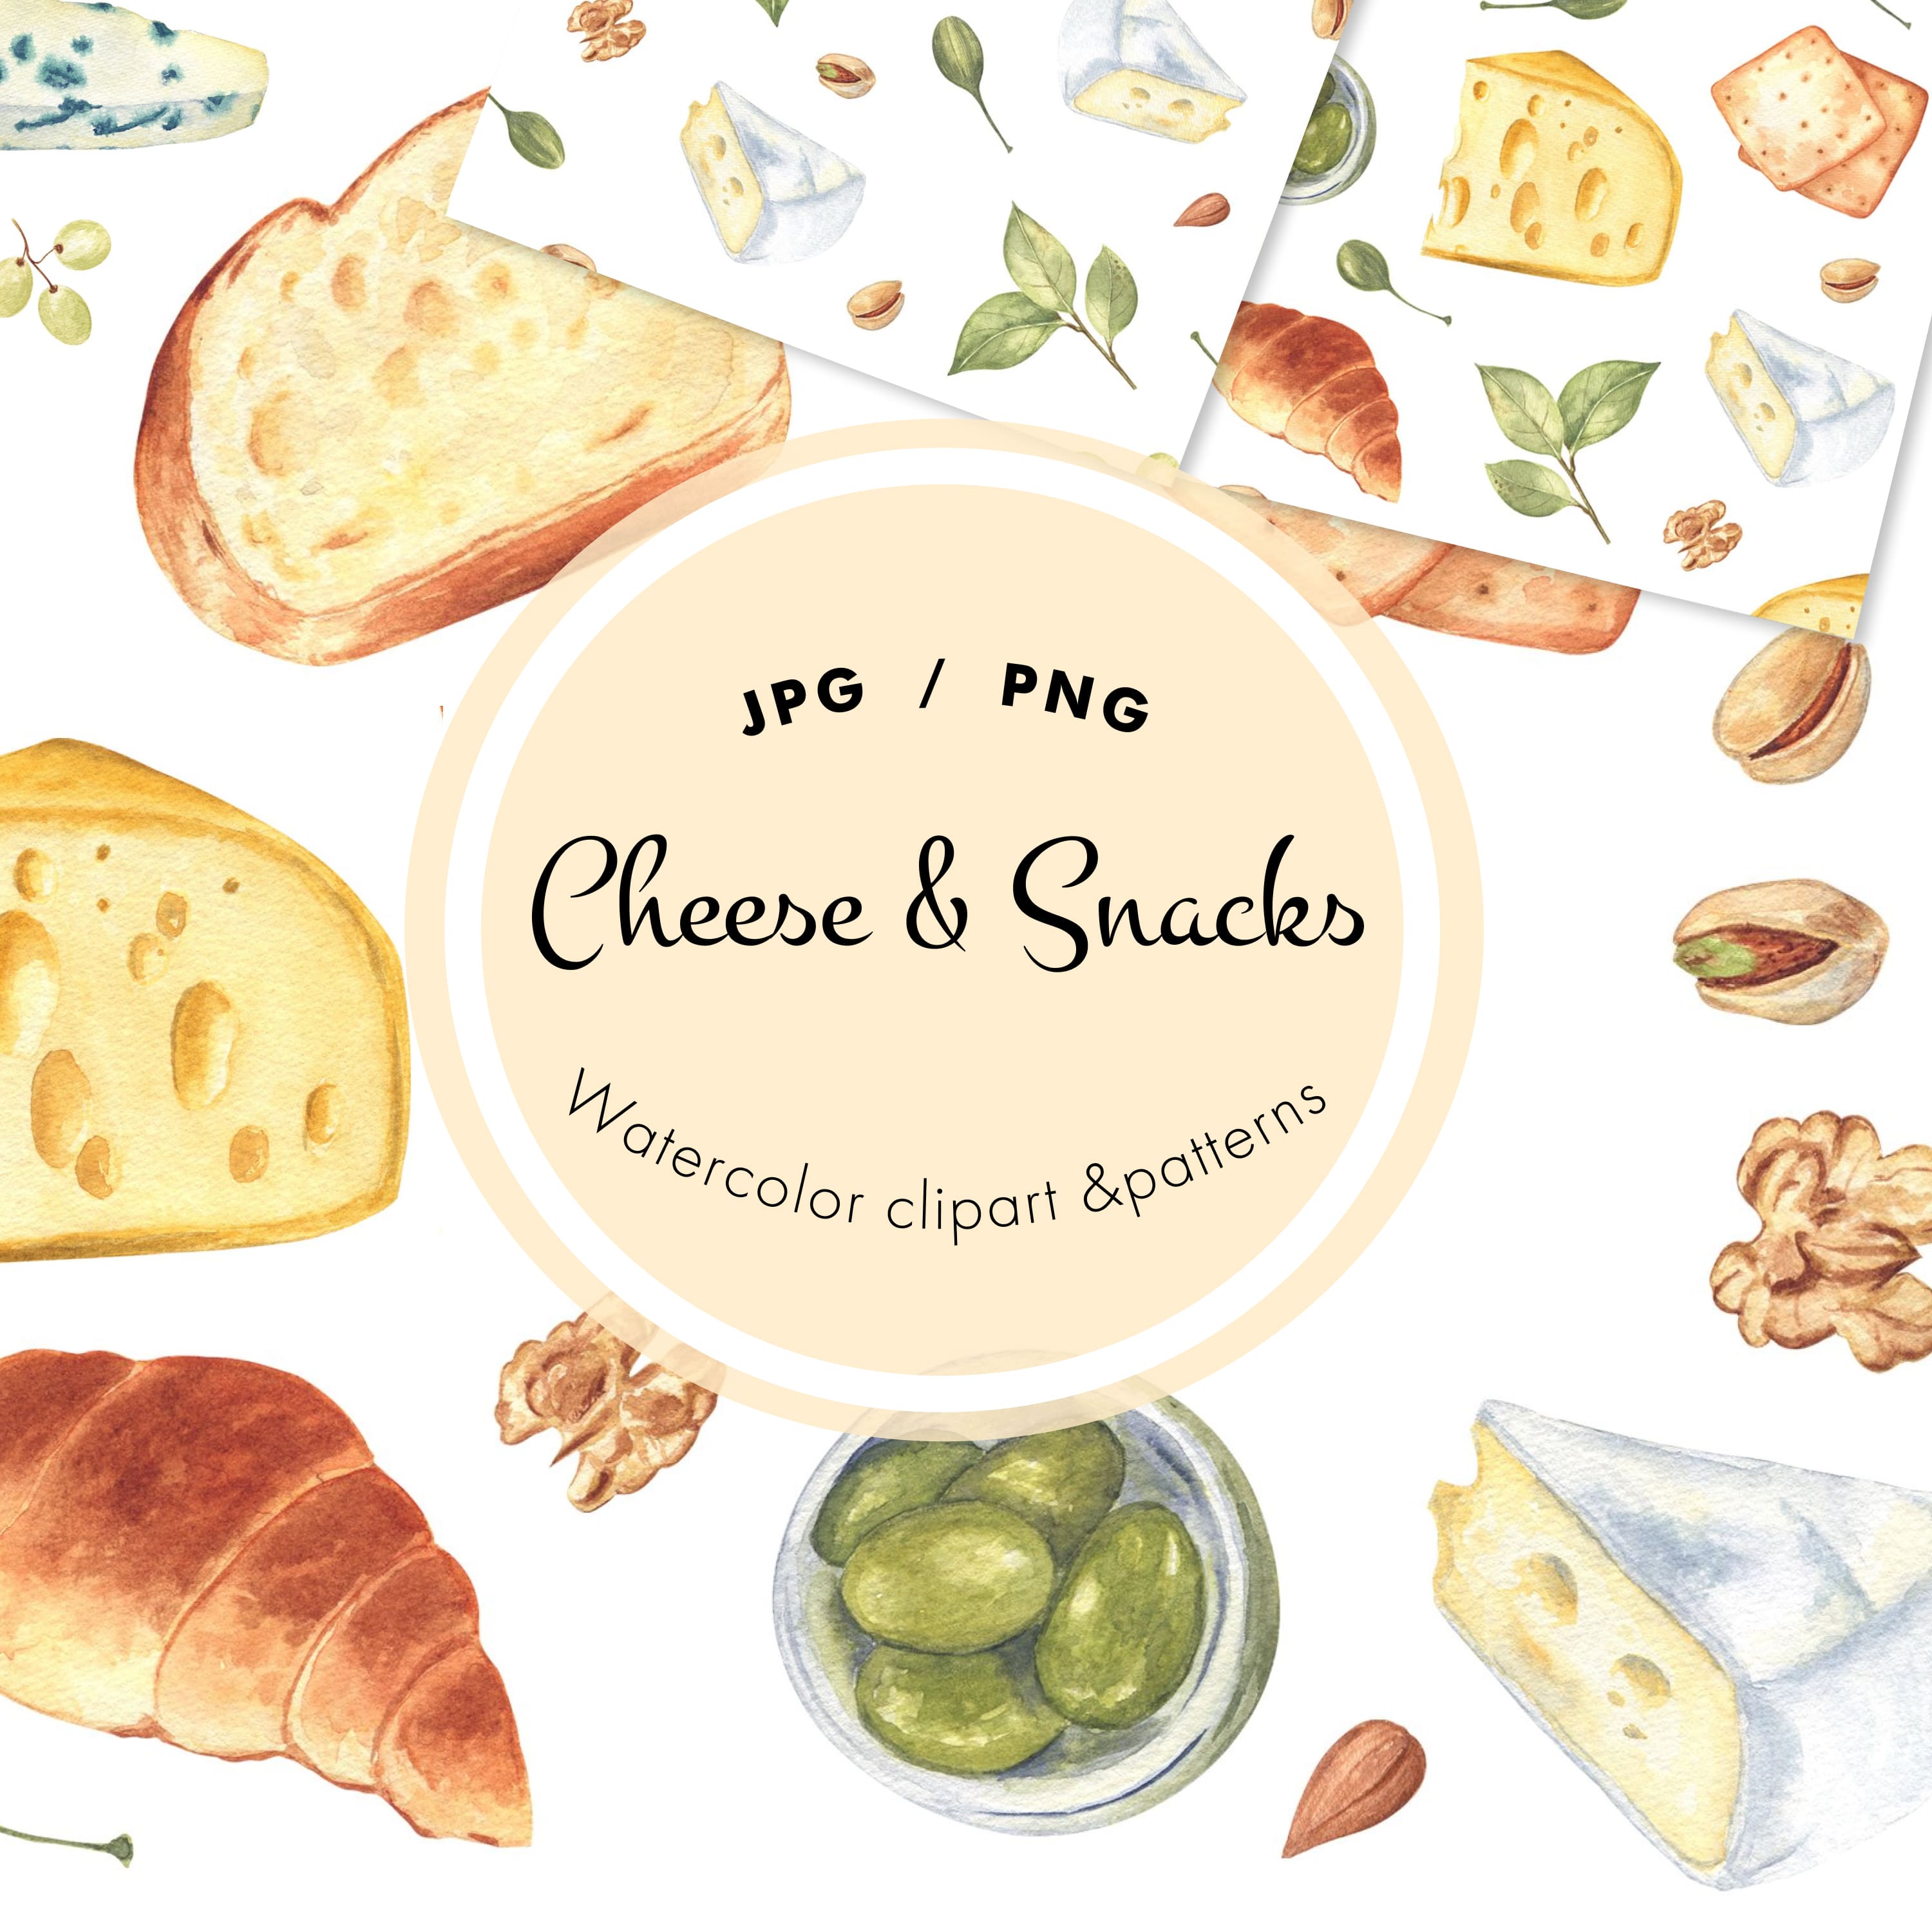 Cover of colorful images of hard cheese and snacks.